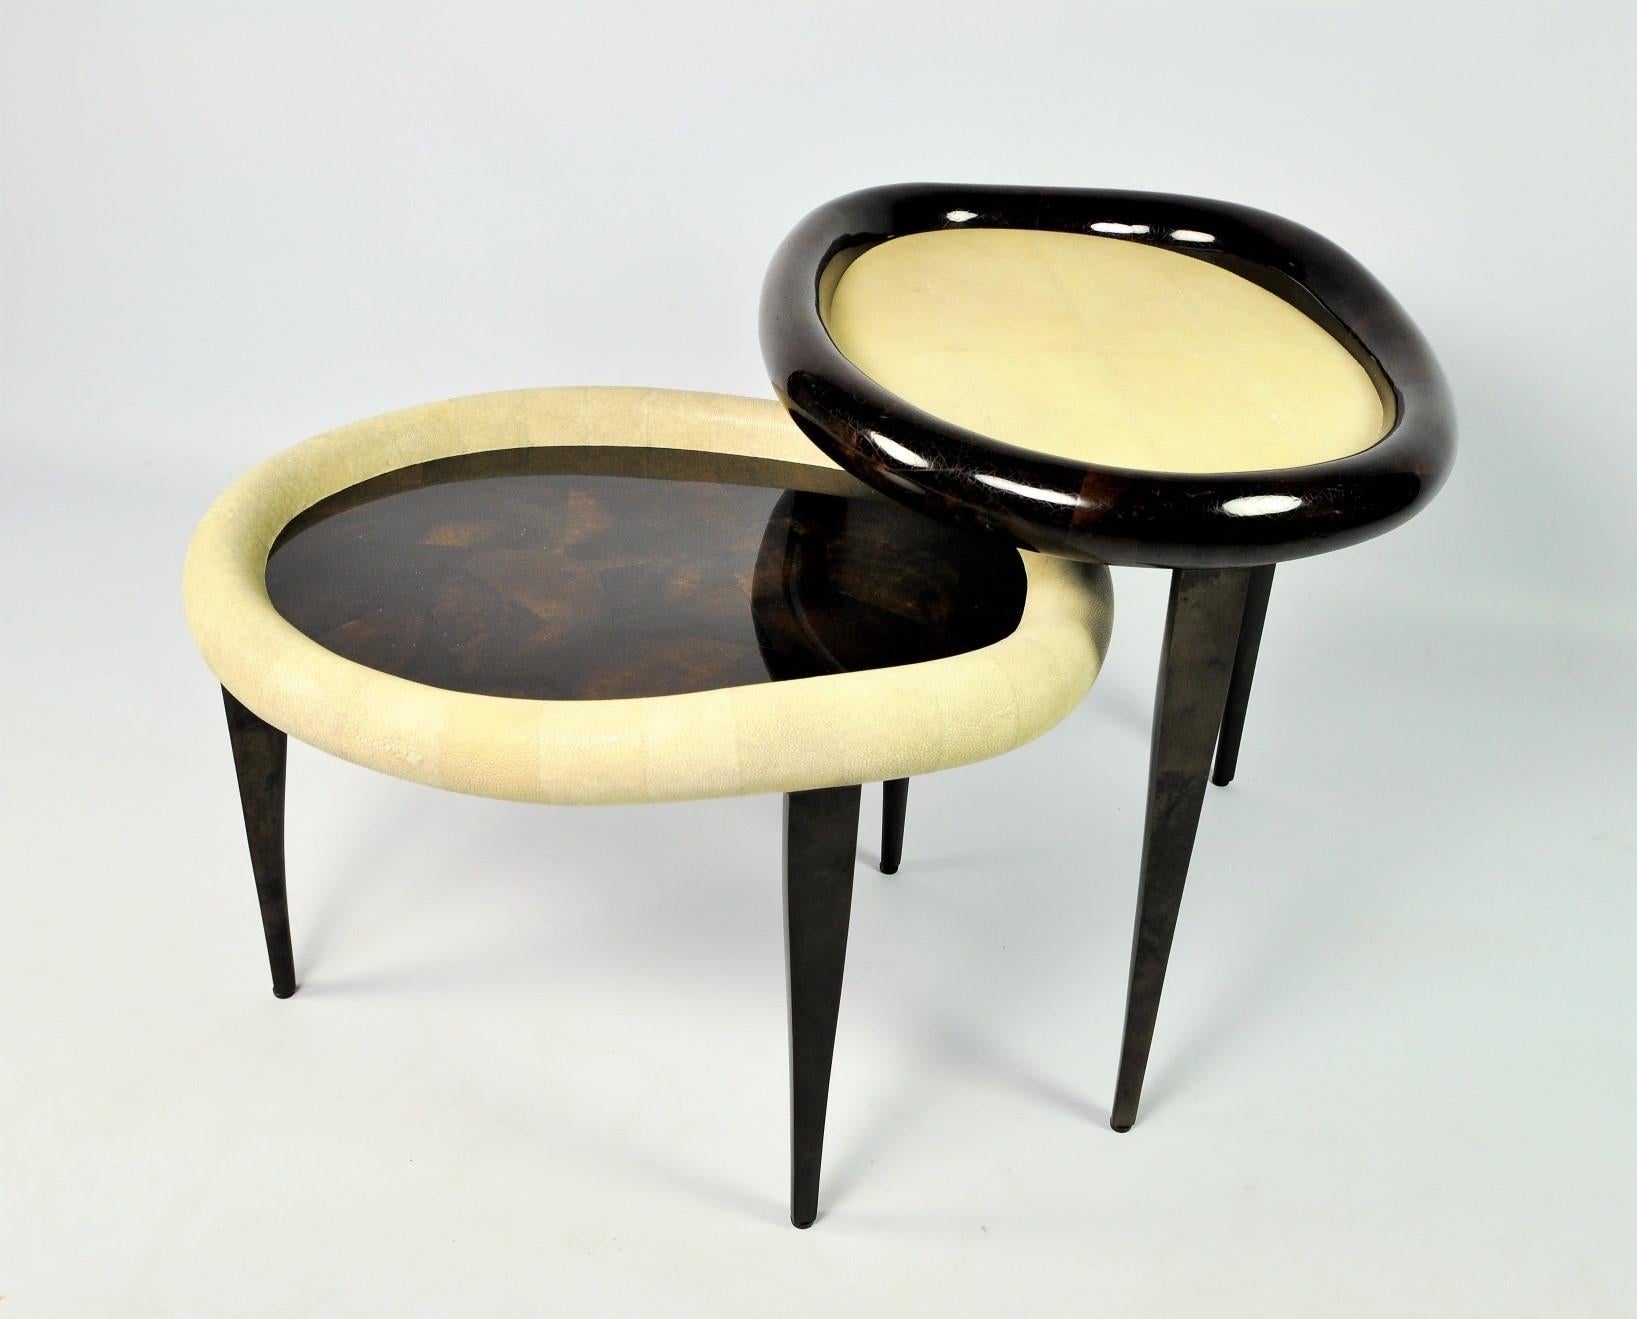 The set of 2 nesting tables is made of a nice mix of natural shagreen (ou ref ANTIC) and polished brown pen shell marquetry.
The feet are covered with a brownish parchment (goatskin).
This nice set of organic side tables is very versatile and can